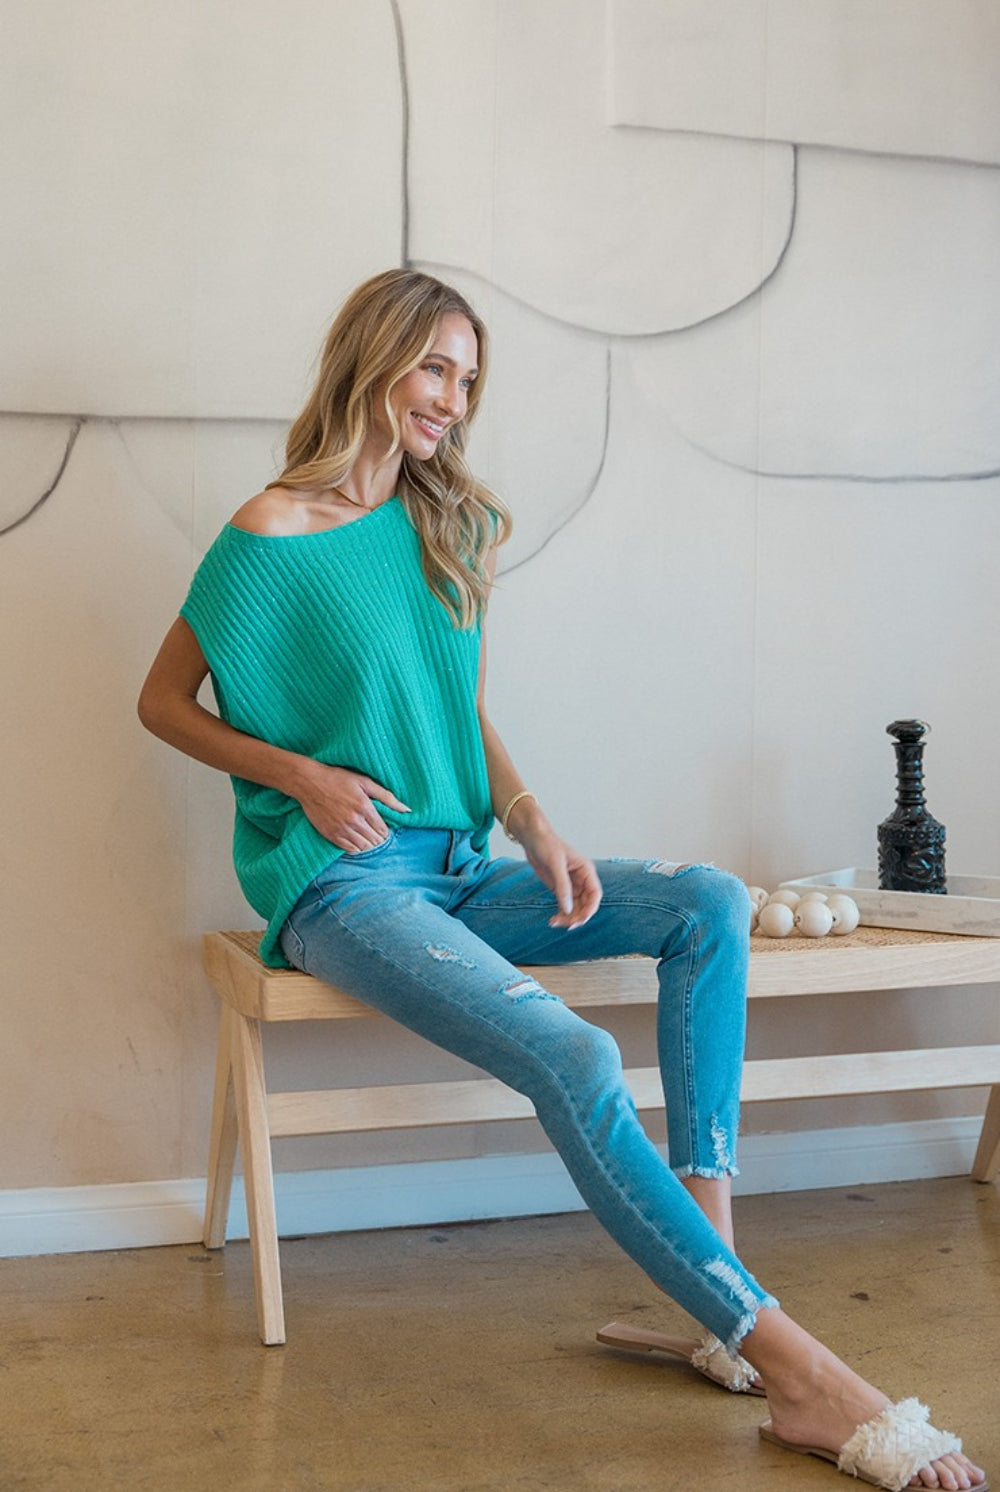 A woman smiling gently while modeling a teal ribbed sweater vest with an off-the-shoulder neckline, giving it a casual yet chic look. She is paired with light blue distressed jeans, sitting on a wooden stool against a neutral background, adding a relaxed and approachable vibe to the image. Her blonde hair falls in loose waves, complementing the laid-back yet fashionable outfit.